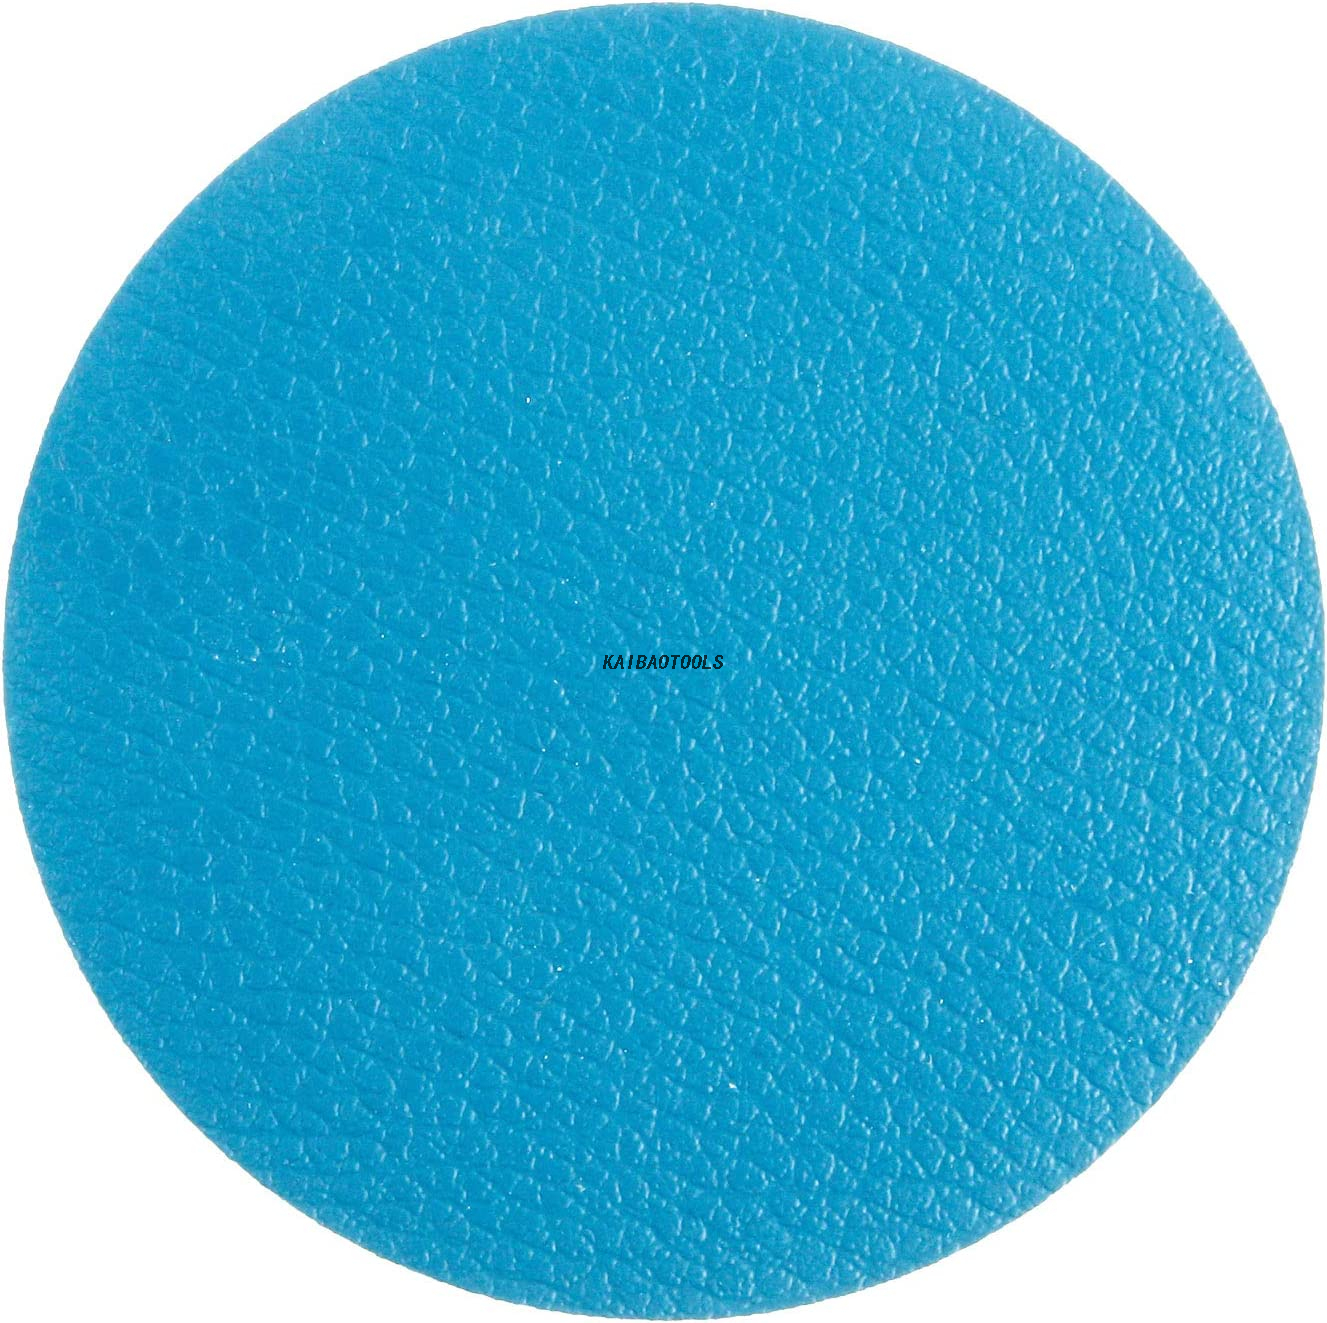 125mm 5 inch PSA Sanding Pads and Backing Pad for Dual Action Air Sander 